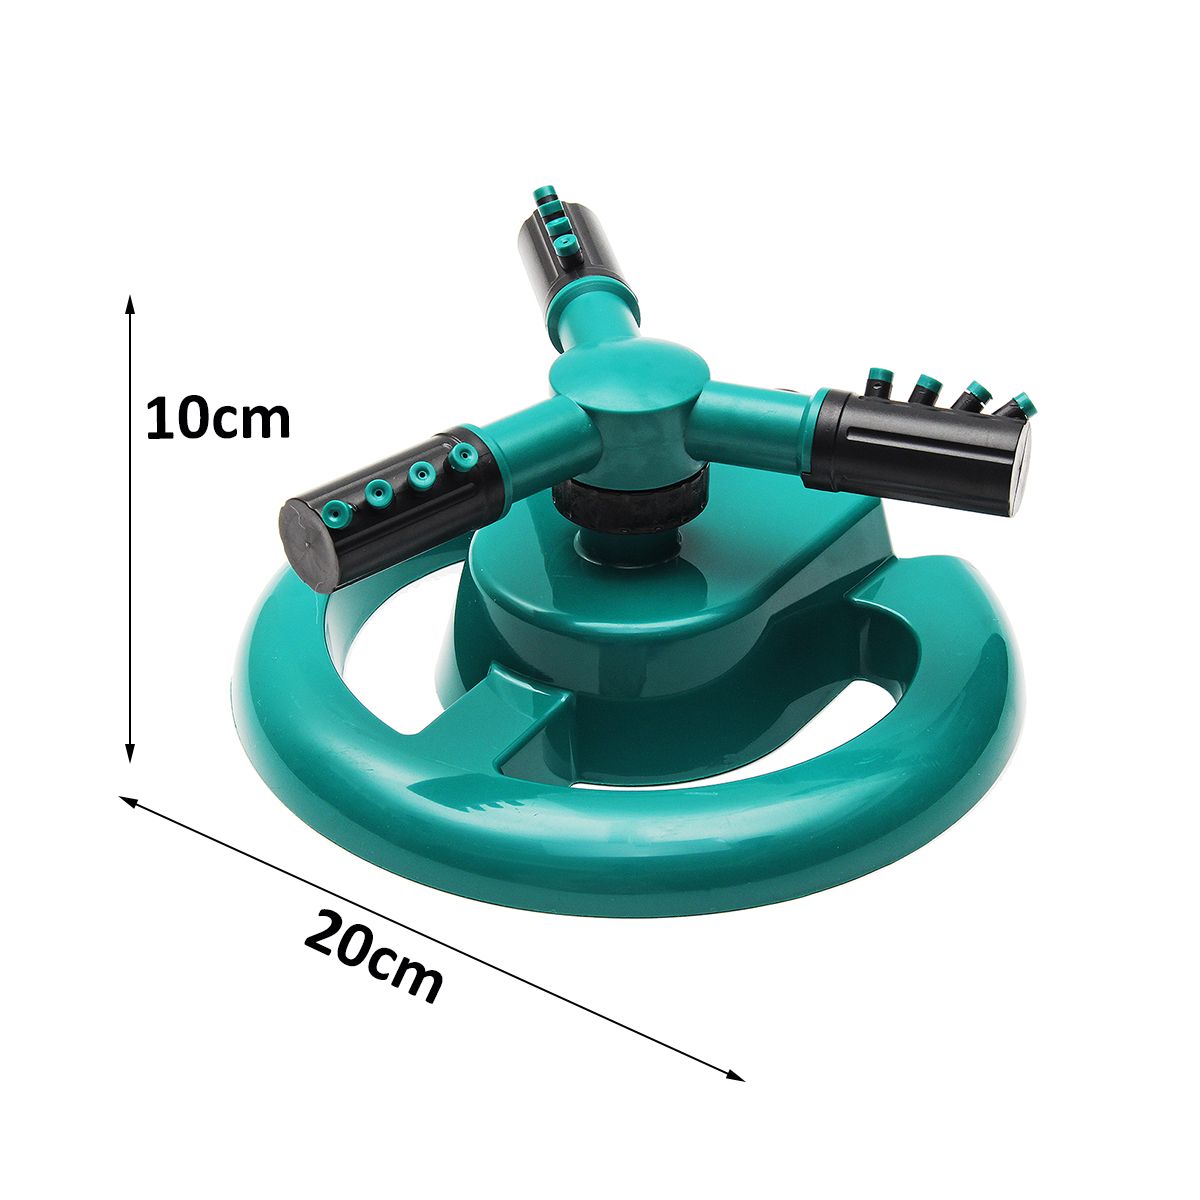 360-Degree-Automatic-Rotating-Watering-Revolving-Sprinkler-3-Nozzle-Irrigation-System-Lawn-Watering-1342827